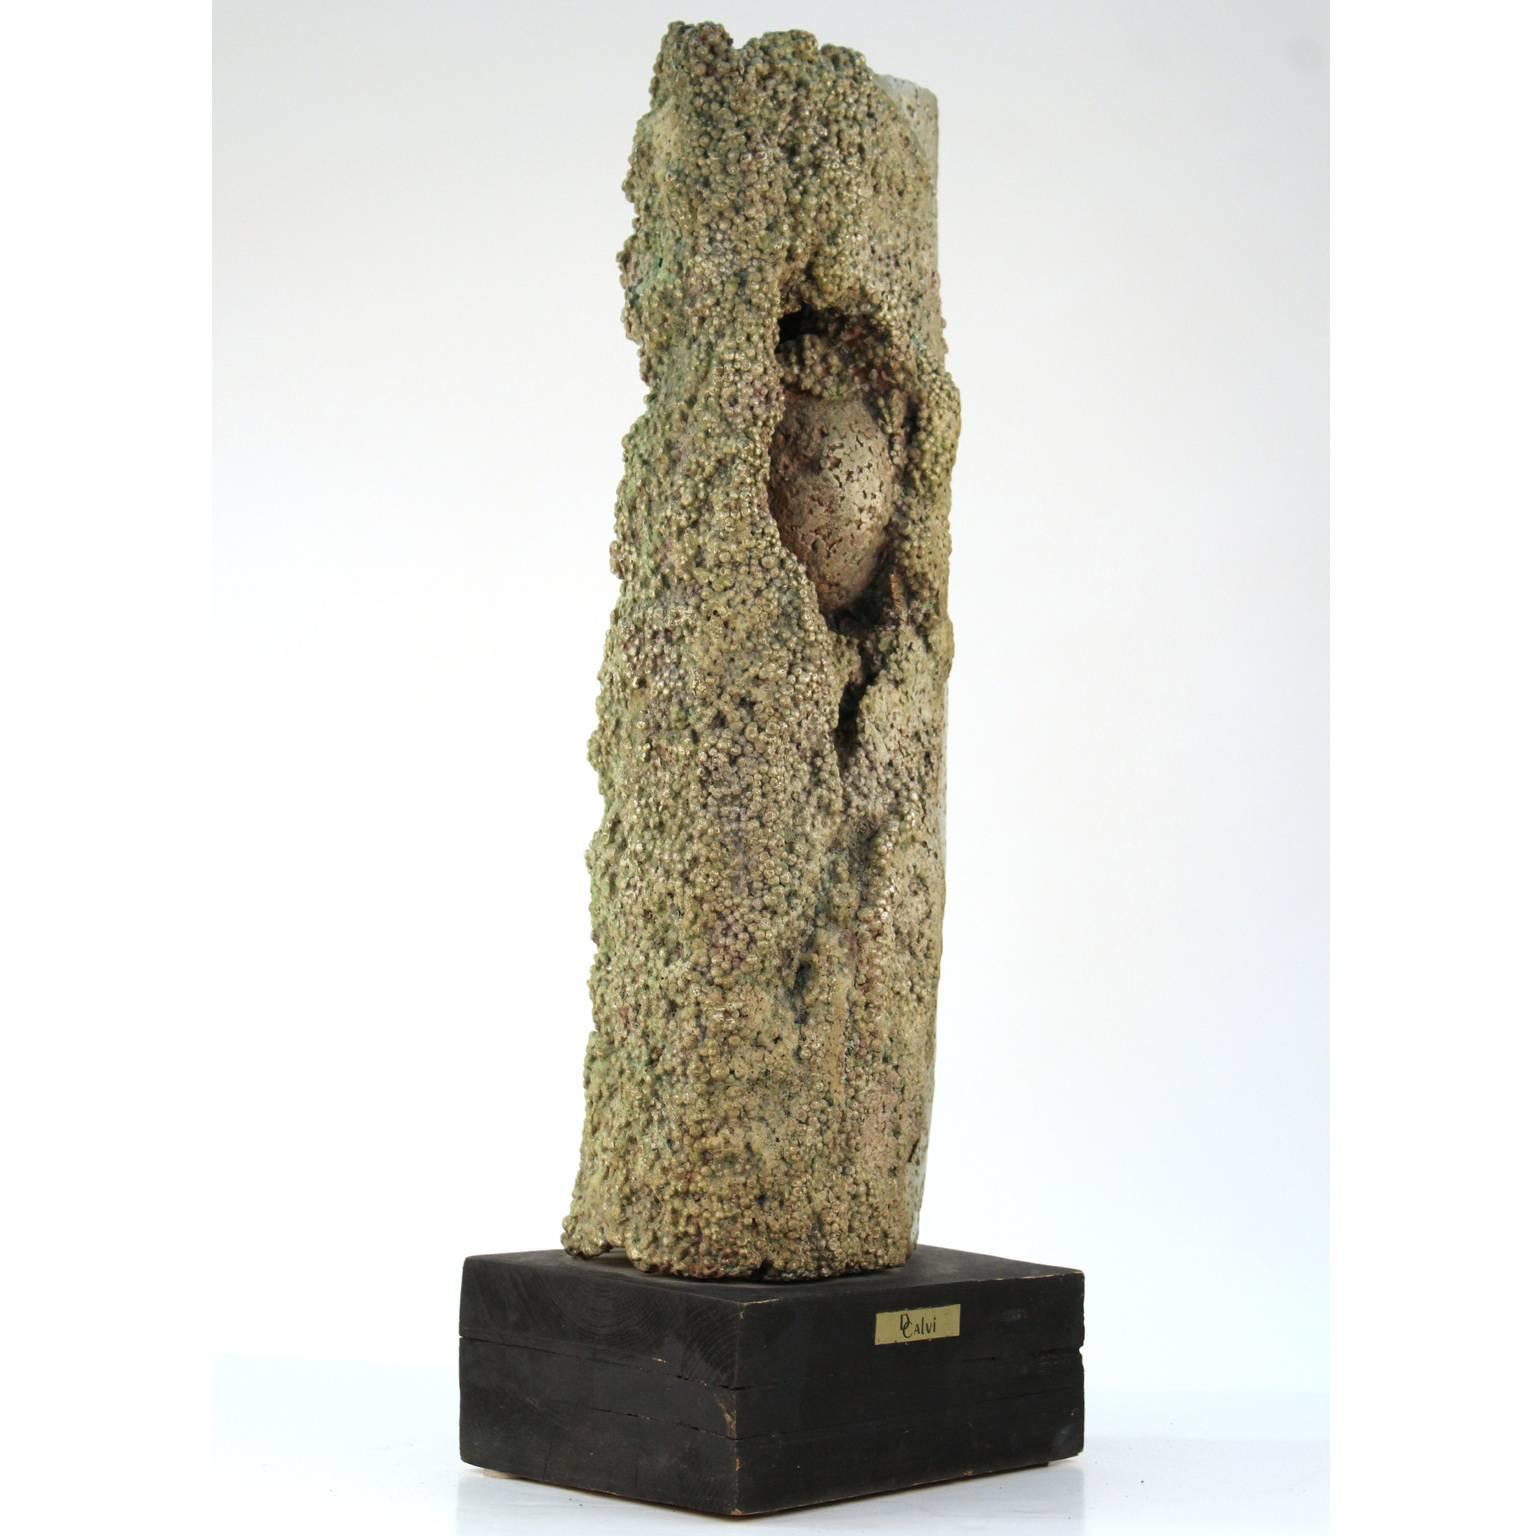 A 1960s Brutalist style abstract sculpture in cast aluminum made by Dcalvi. Plaque mounted on painted wood base marked Dcalvi". Great original condition.